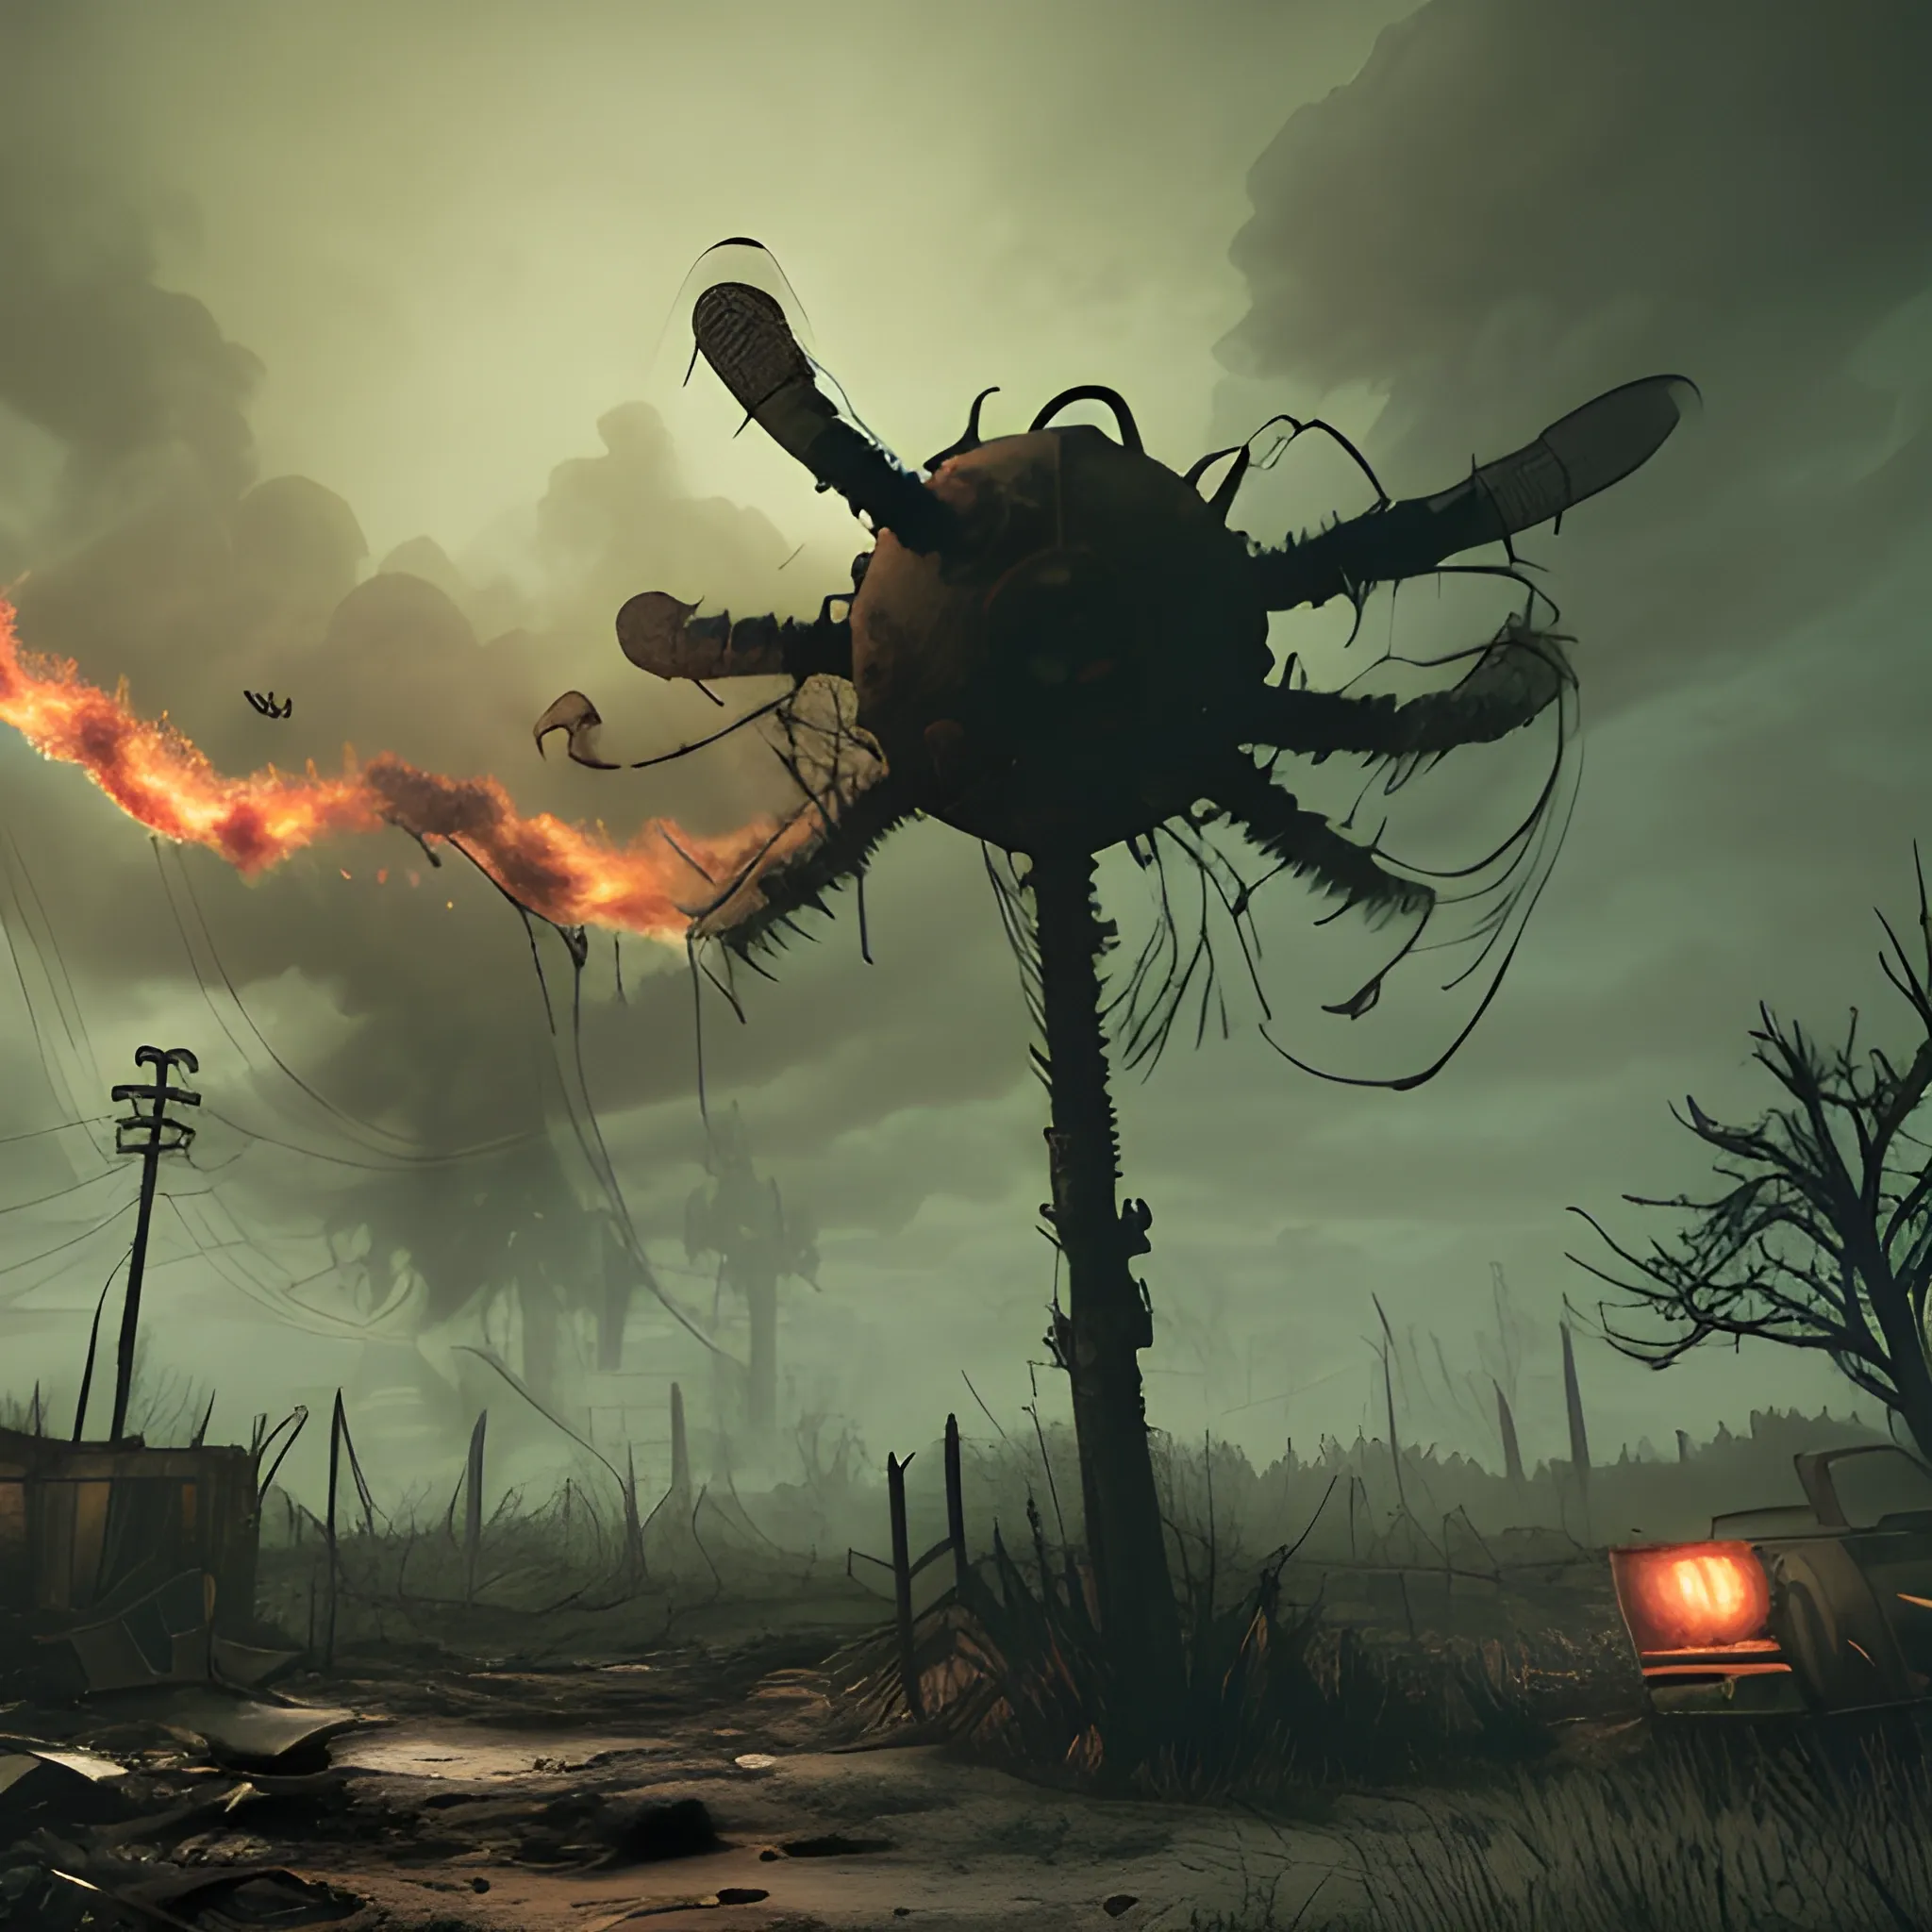 fallout 4, a large mutated mosquito  "dark, gritty, desolate, abandoned, mutated plants, distressed colors, dynamic angle, dusty, fire and smoke, gloomy atmosphere